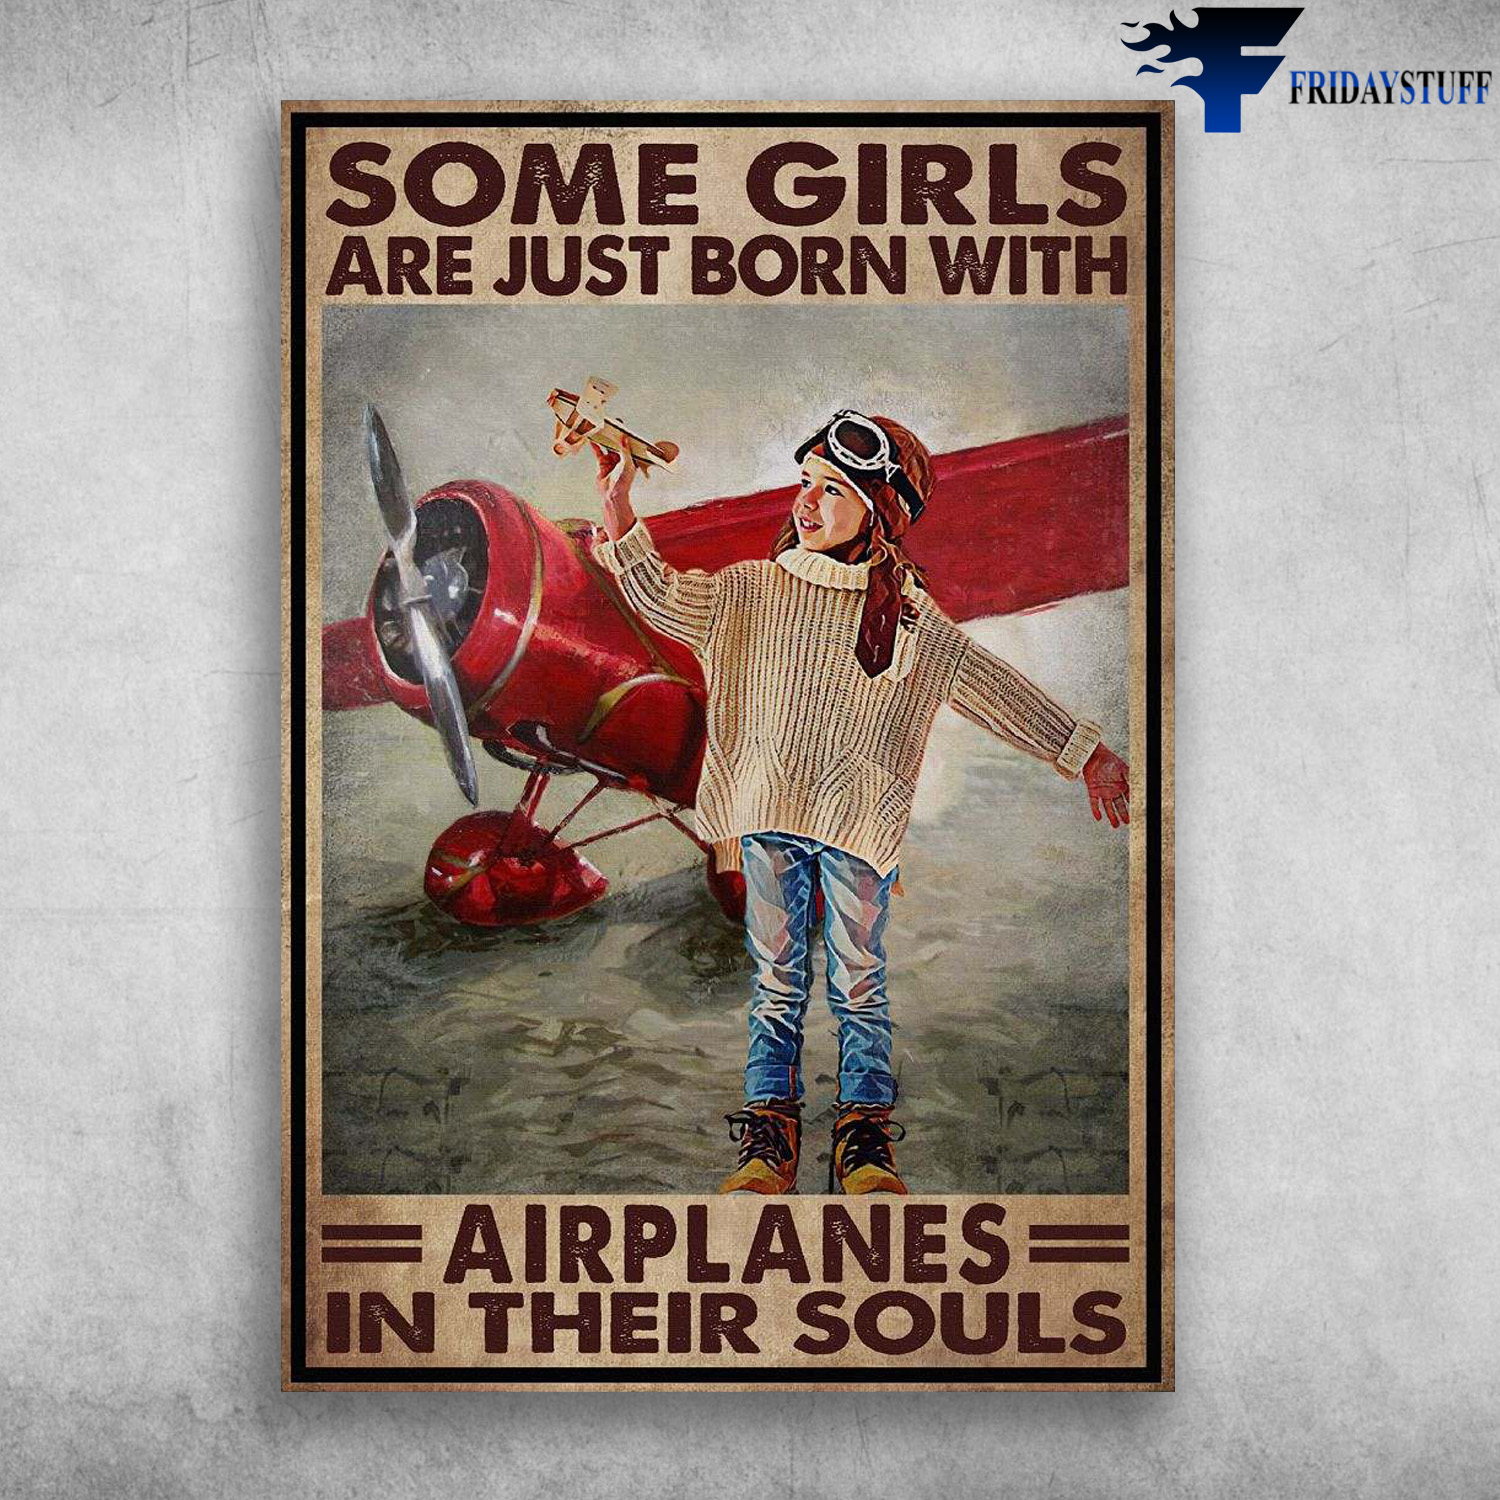 Little Pilot, Pilot Girl - Some Girls Are Just Born With, Airplanes In Their Souls